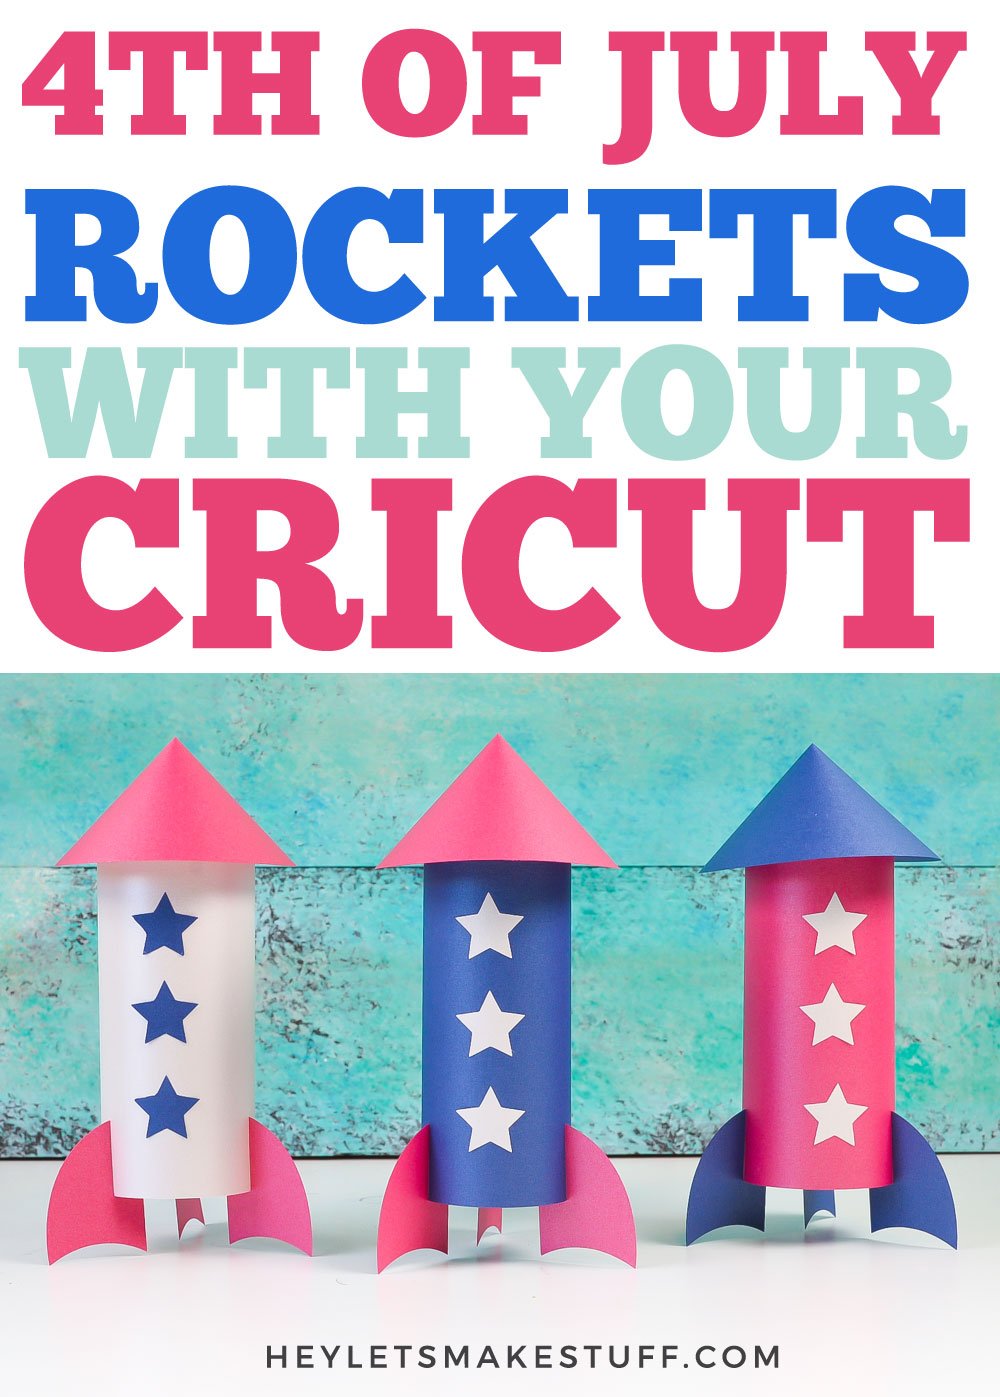 Picture of three paper rockets made out of red, white and blue paper that can be made with your Cricut